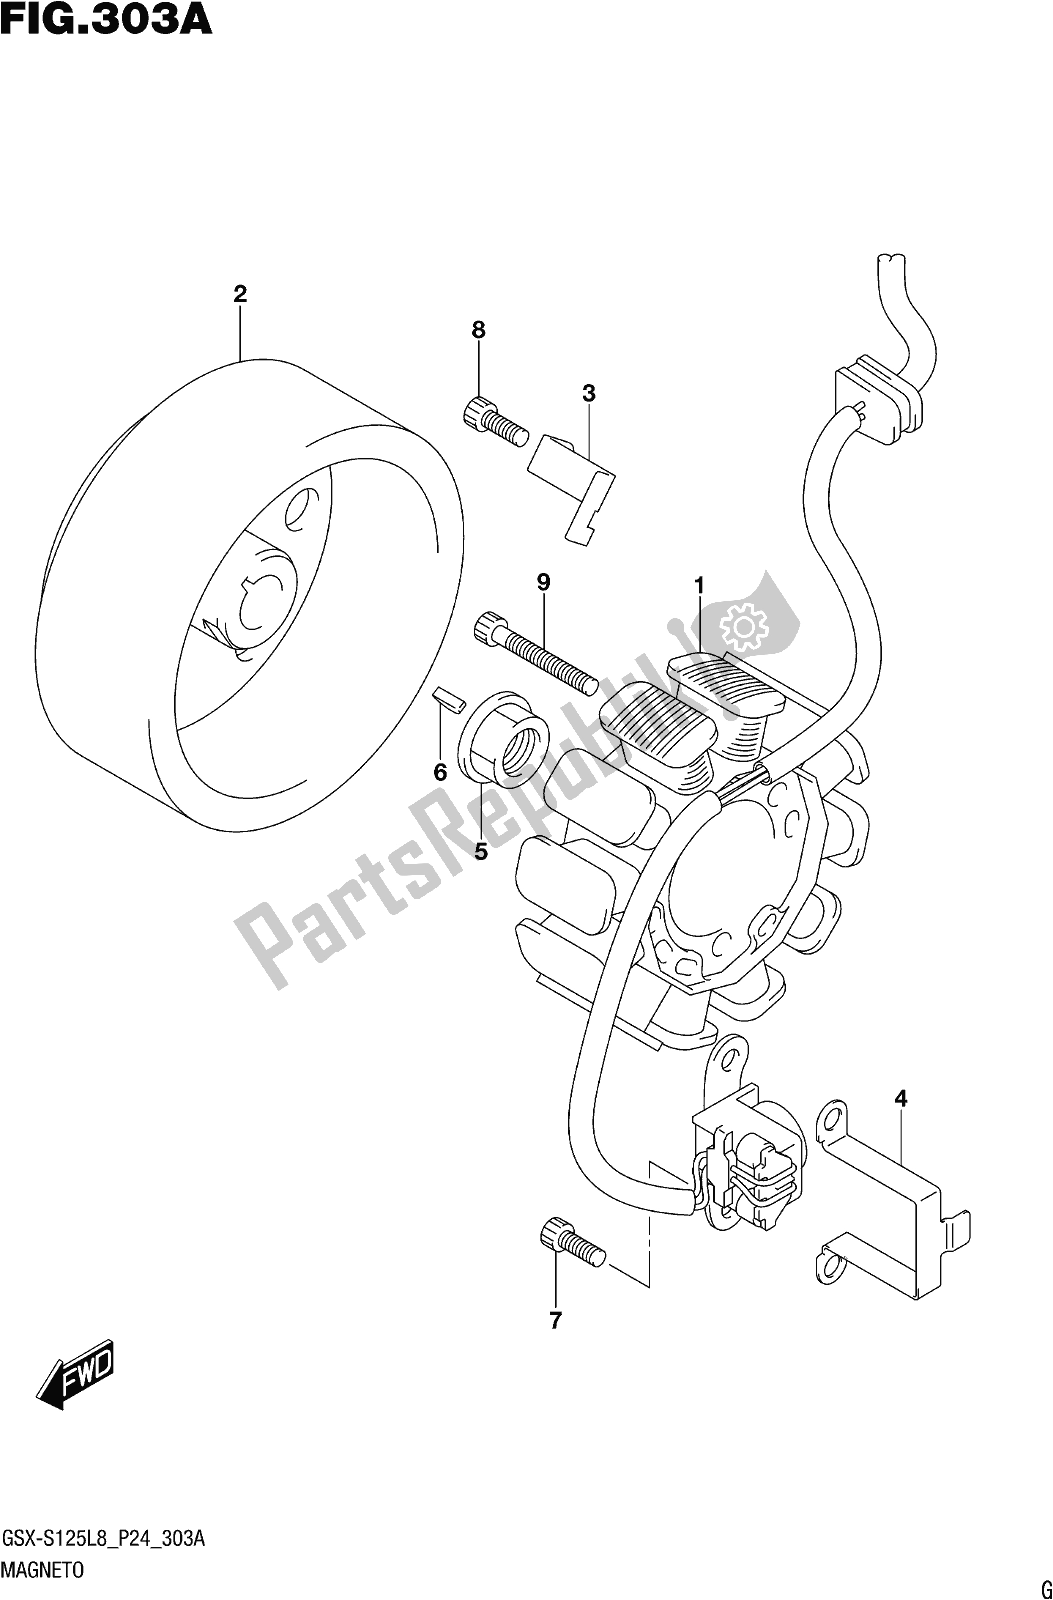 All parts for the Fig. 303a Magneto of the Suzuki Gsx-s 125 ML 2018